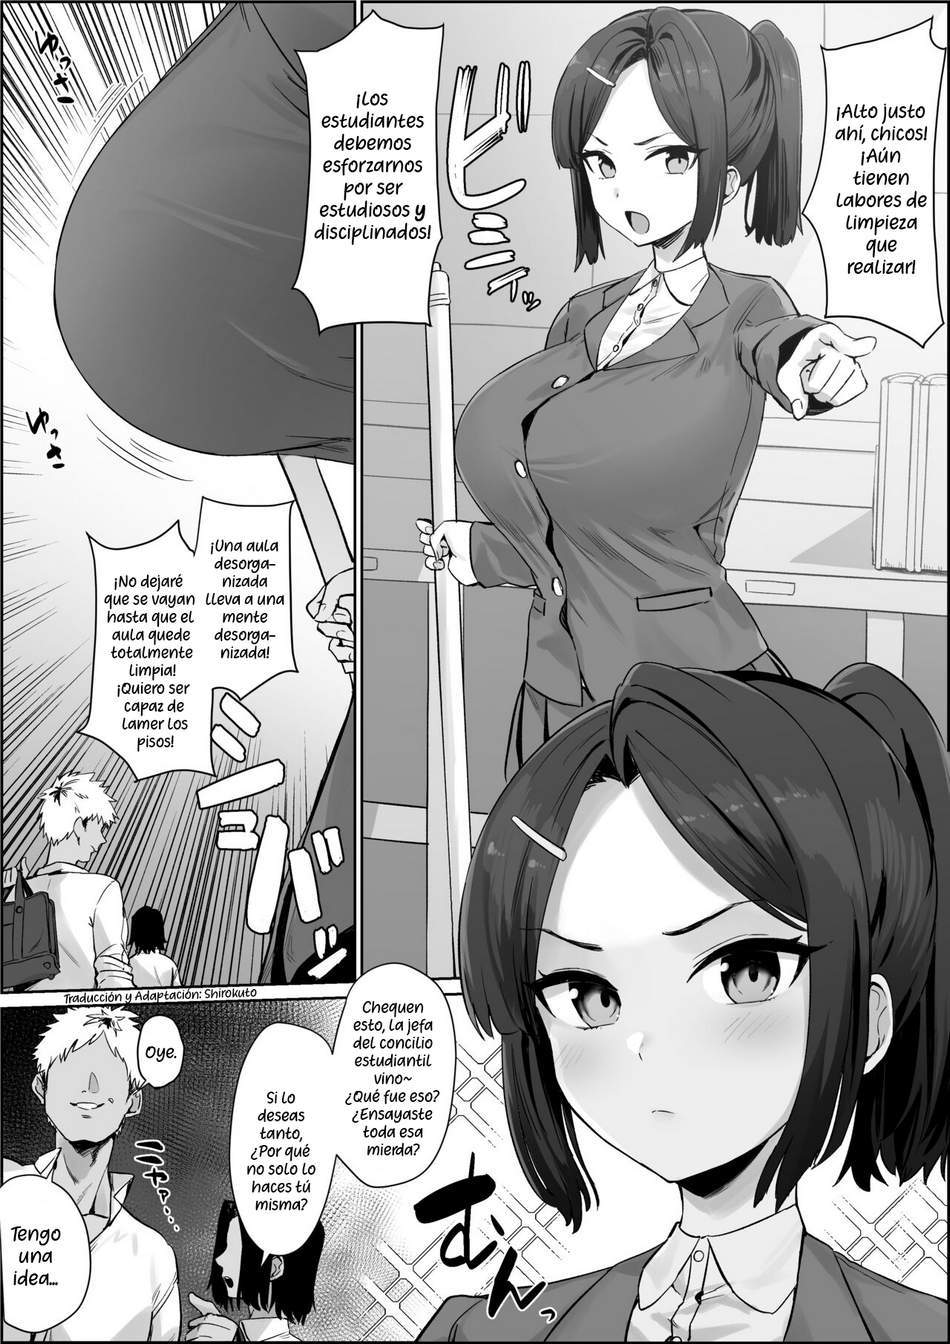 The Student Council Leader’s Instantaneous Fall - Page #1